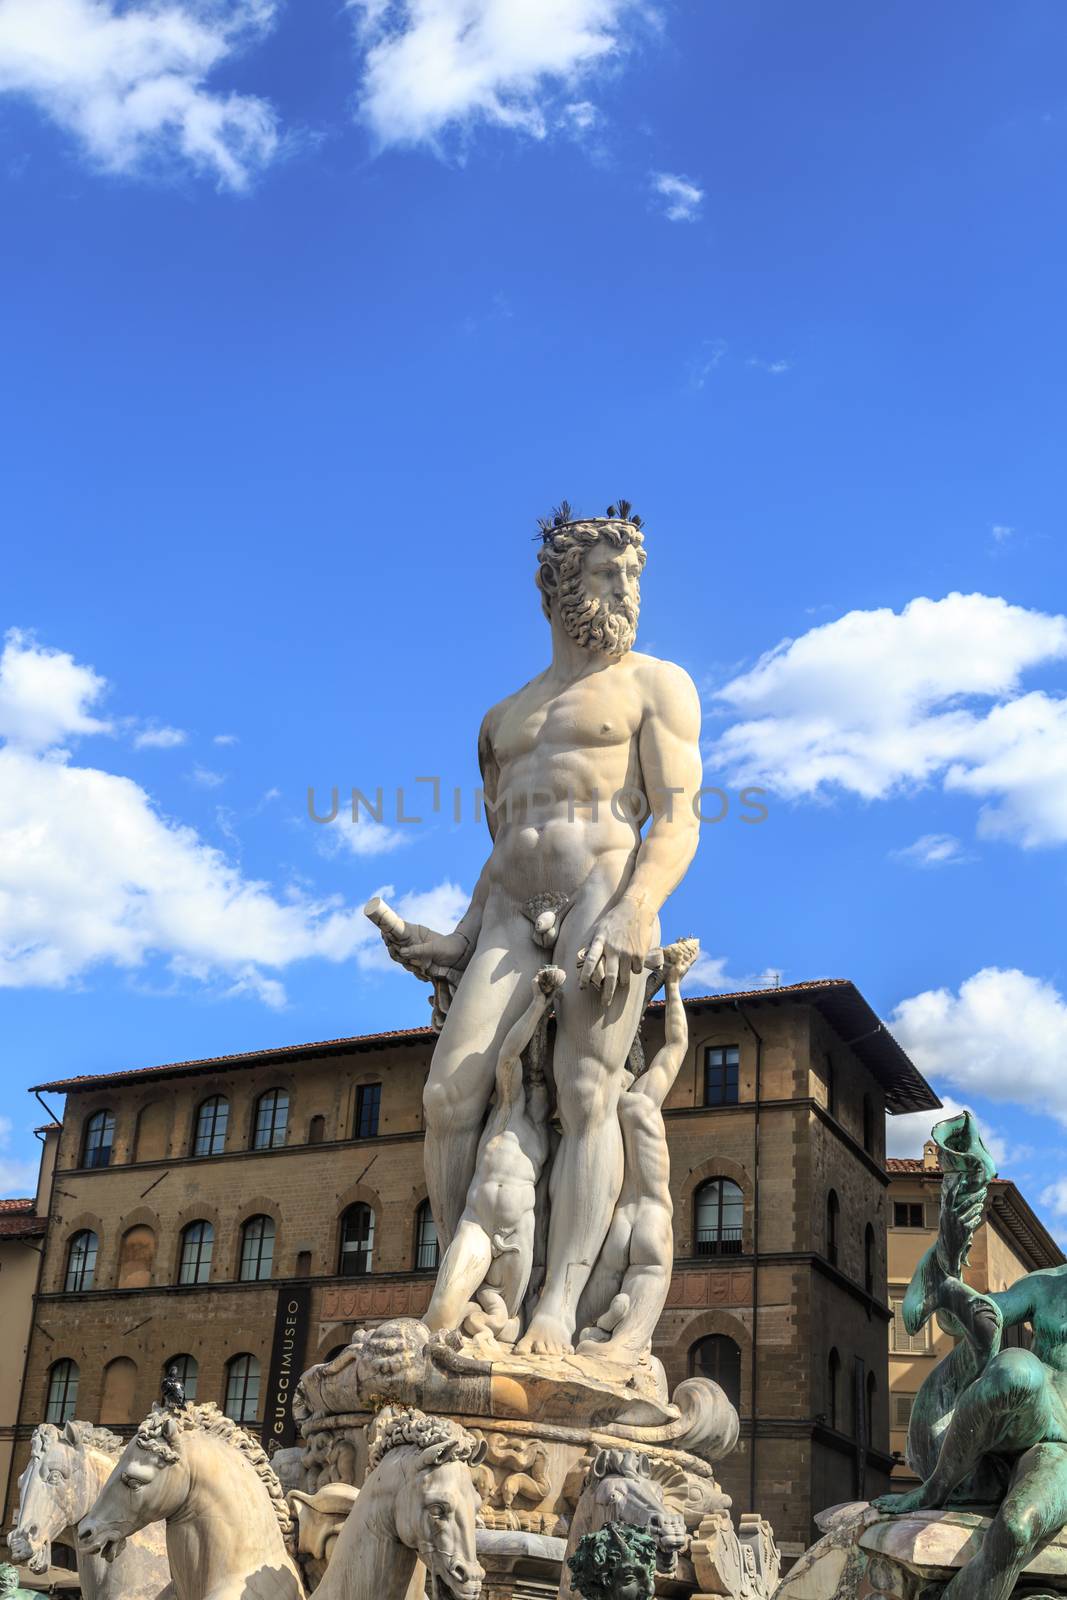 View of famous square of Florence, Piazza Della Signoria with historical big sculptures around.